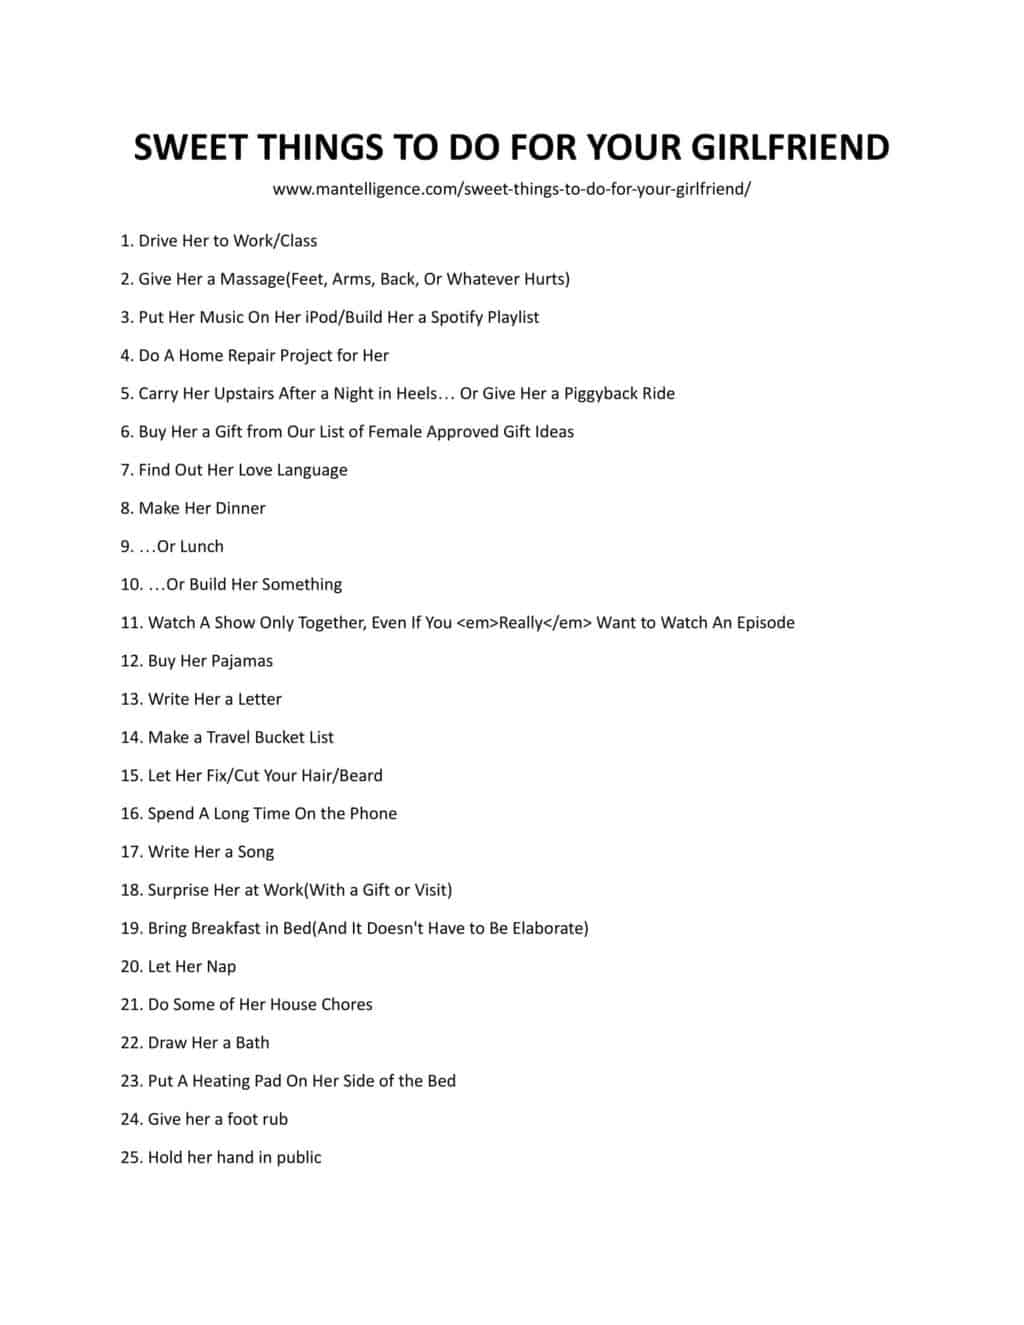 Downloadable and printable list of sweet things to do for your girlfriend as jpg or pdf